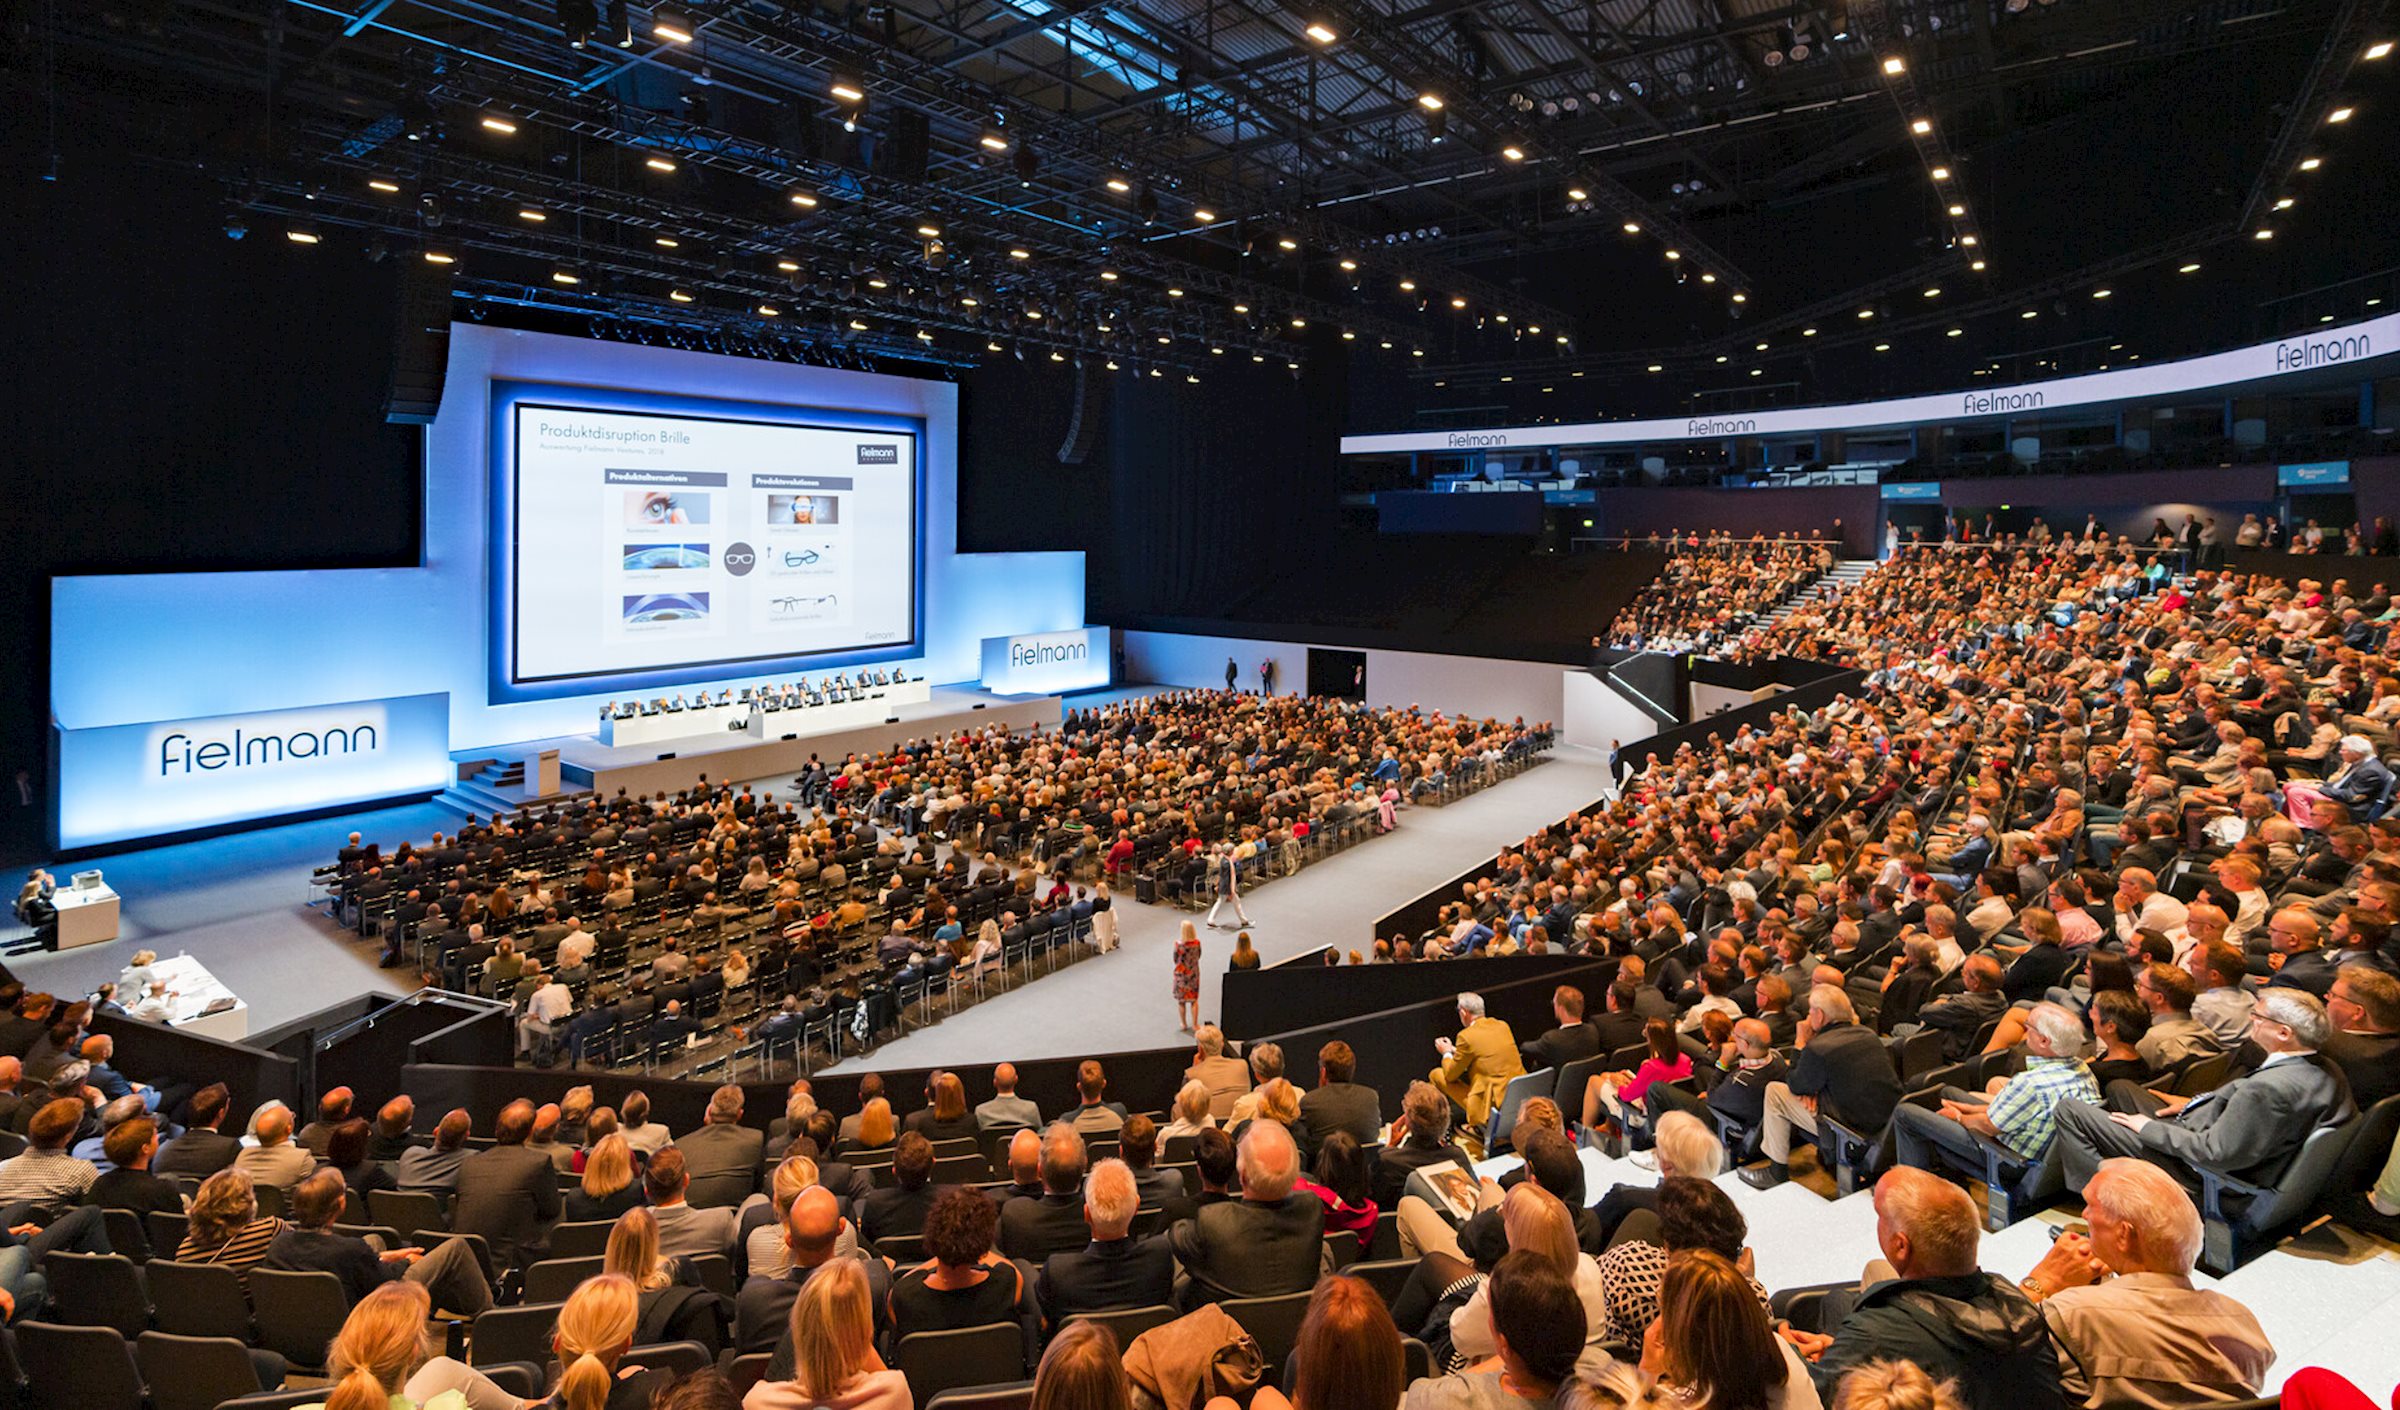 Fielmann Annual Meeting 2019 took place in Hamburg's Barclaycard Arena - PRG creative team designed a room concept and presented it to them together with the corresponding visualizations.